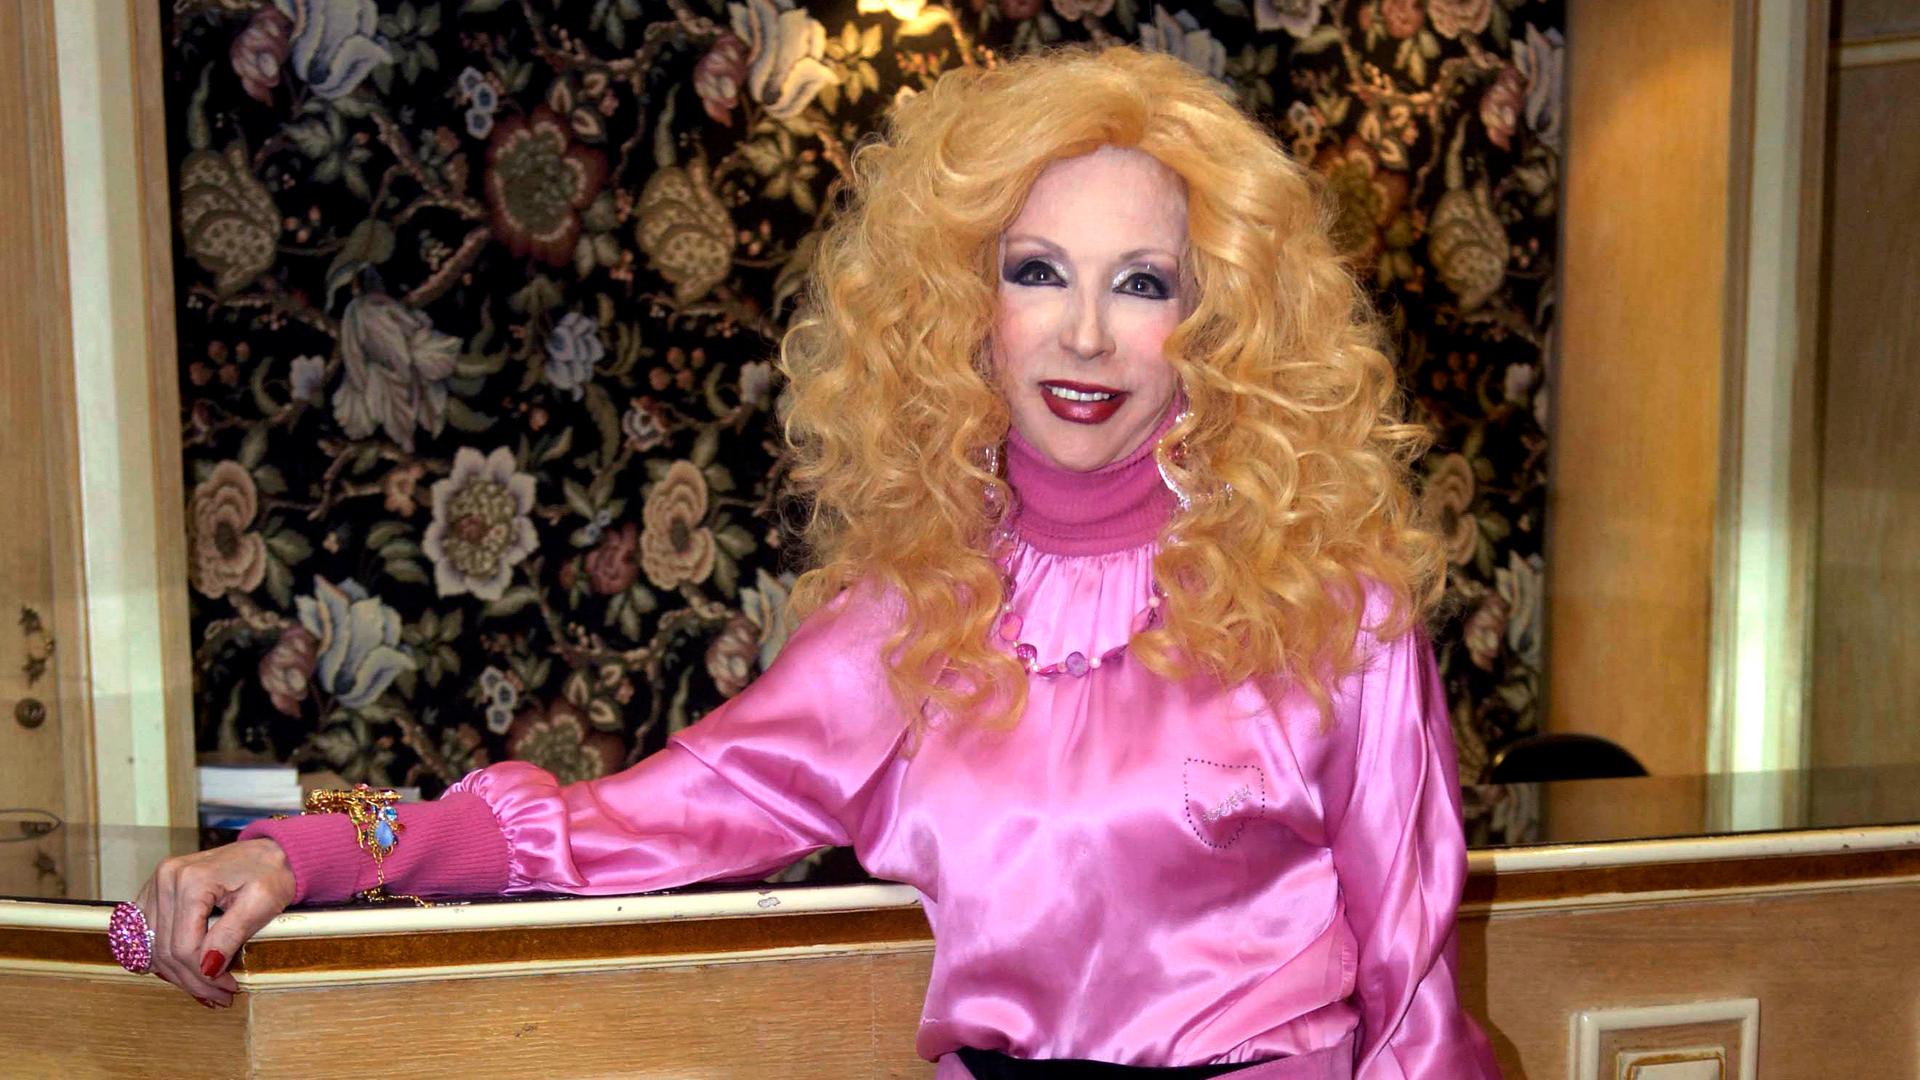 Lebanese singer Sabah poses for a photograph at the Comfort Hotel in Beirut, Lebanon, 2009.